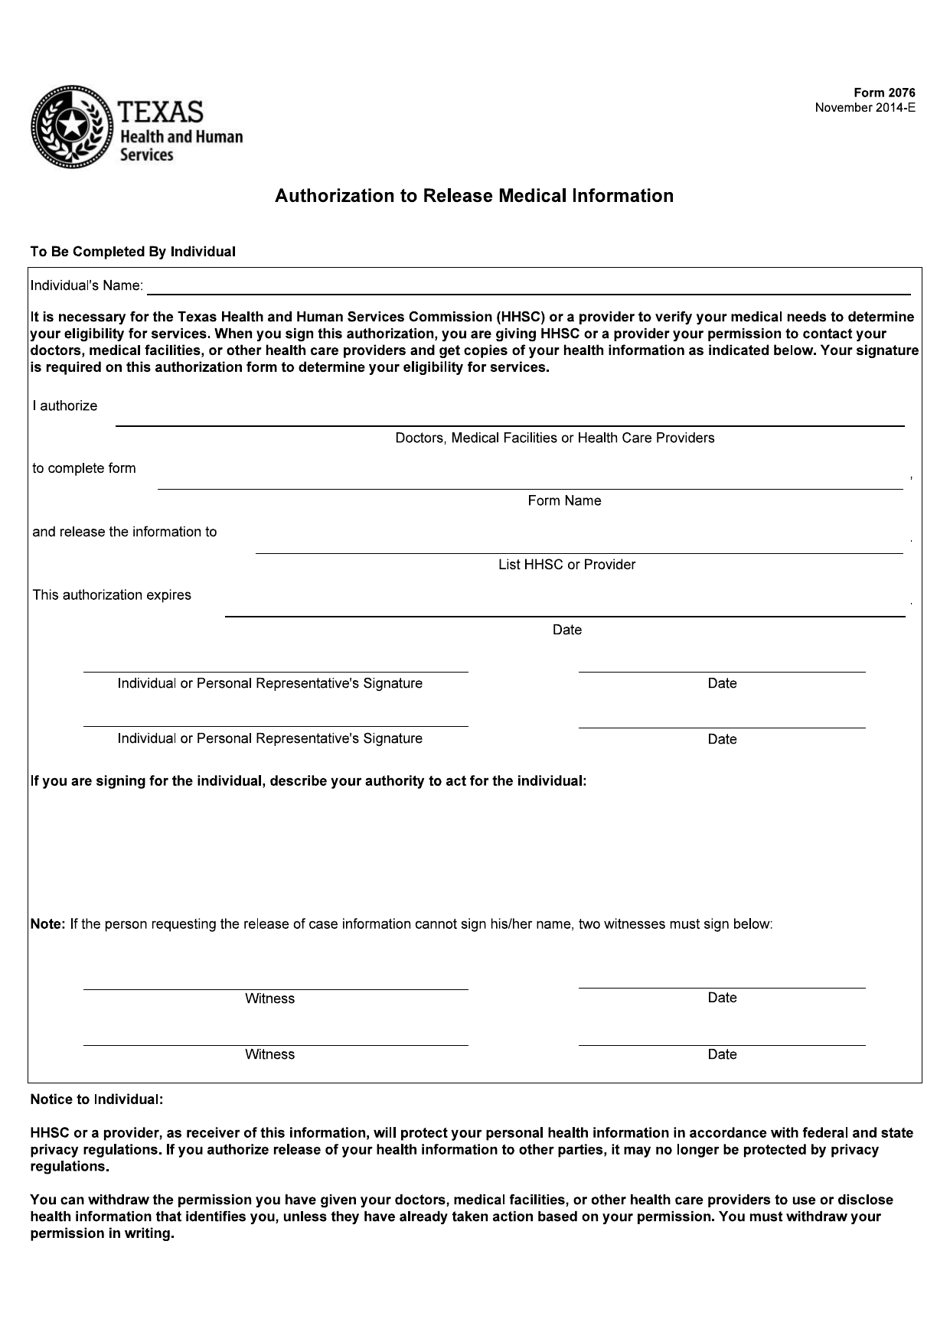 Form 2076 Authorization to Release Medical Information - Texas, Page 1